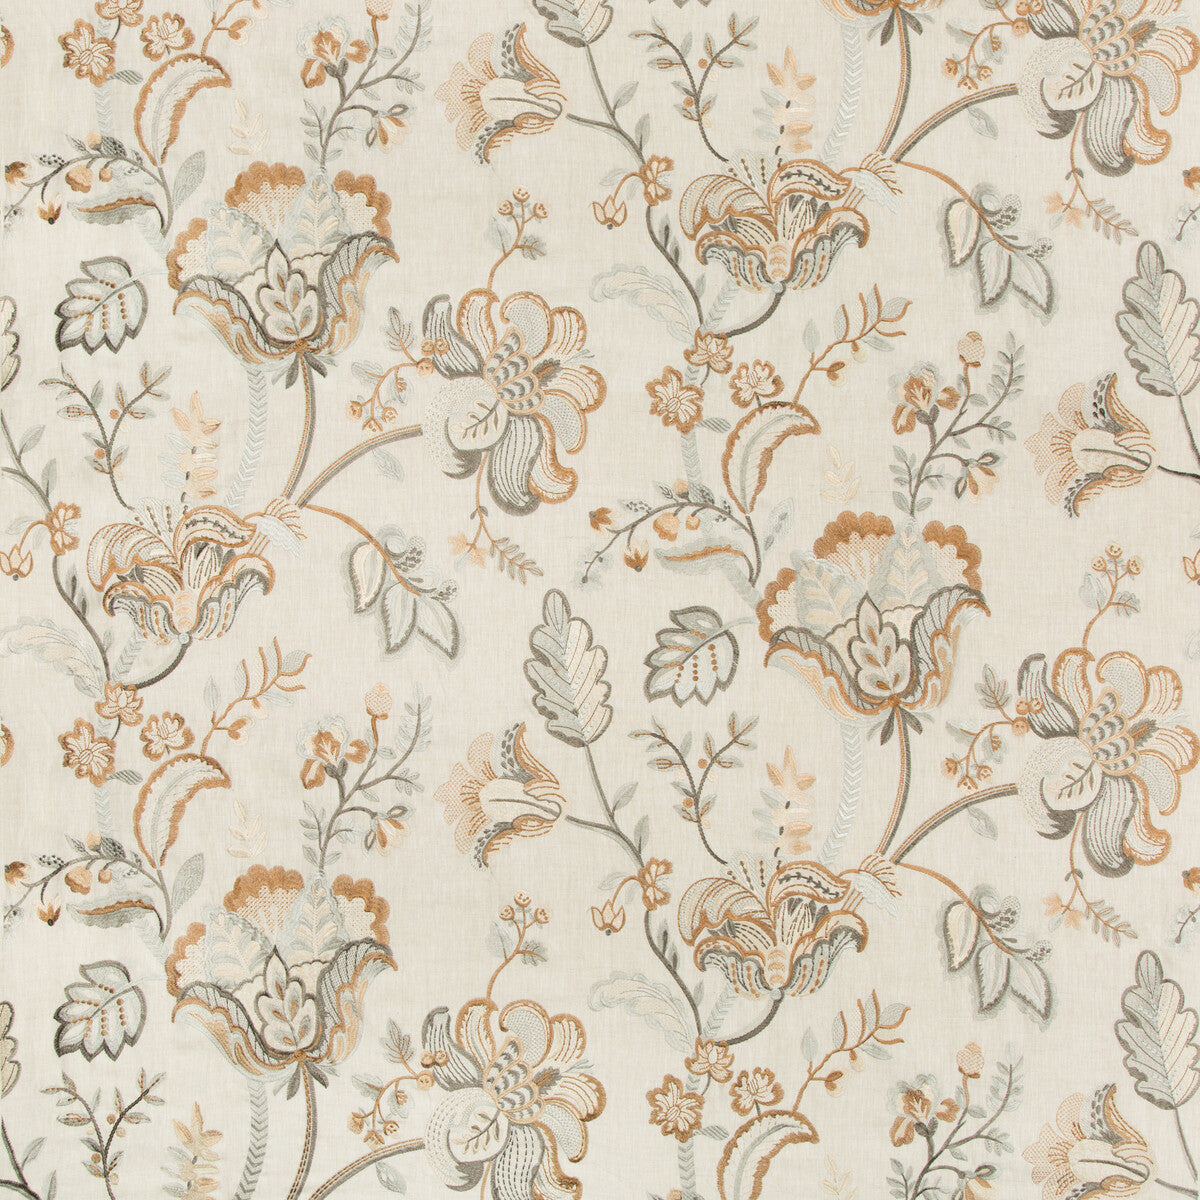 Bradford Linen fabric in almond/pearl color - pattern 2017173.111.0 - by Lee Jofa in the Westport collection